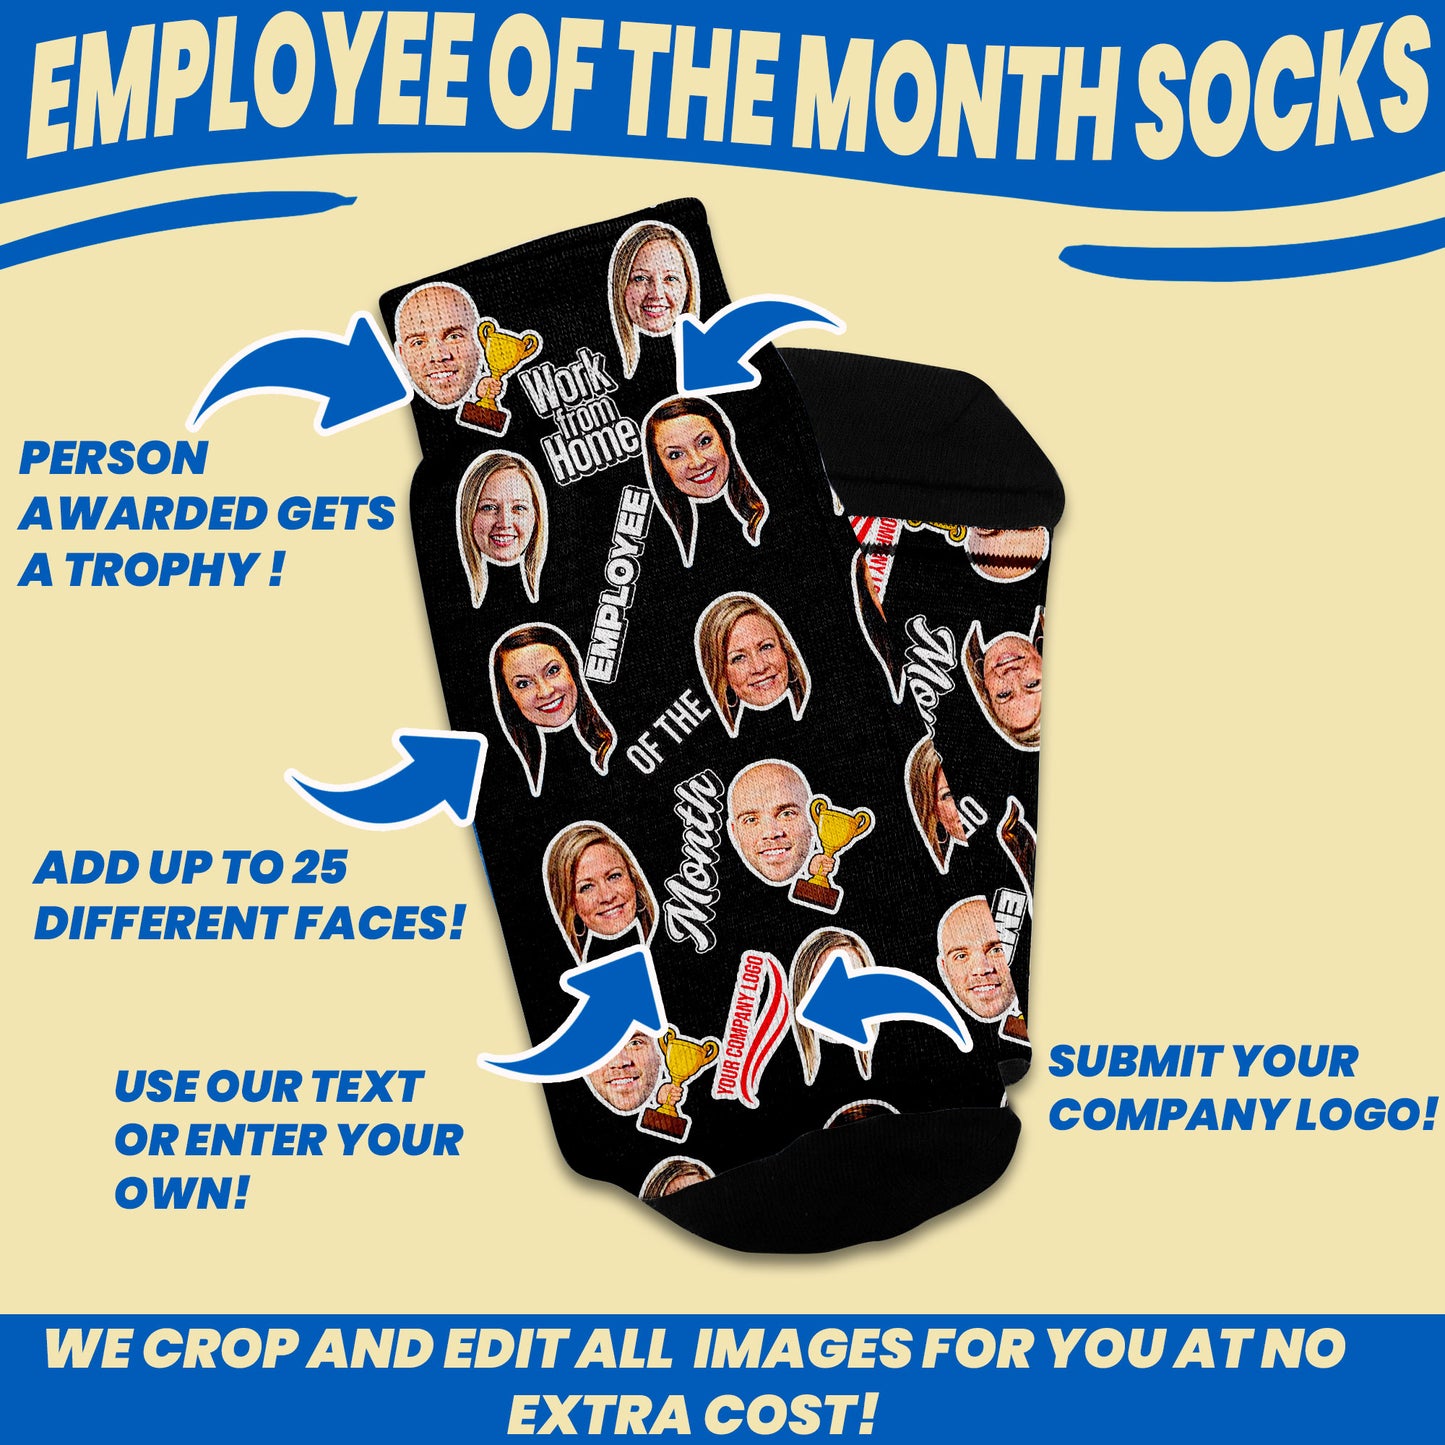 work from home employee of the month coworker gift socks with faces customization options such as multiple faces, sock color, text and more